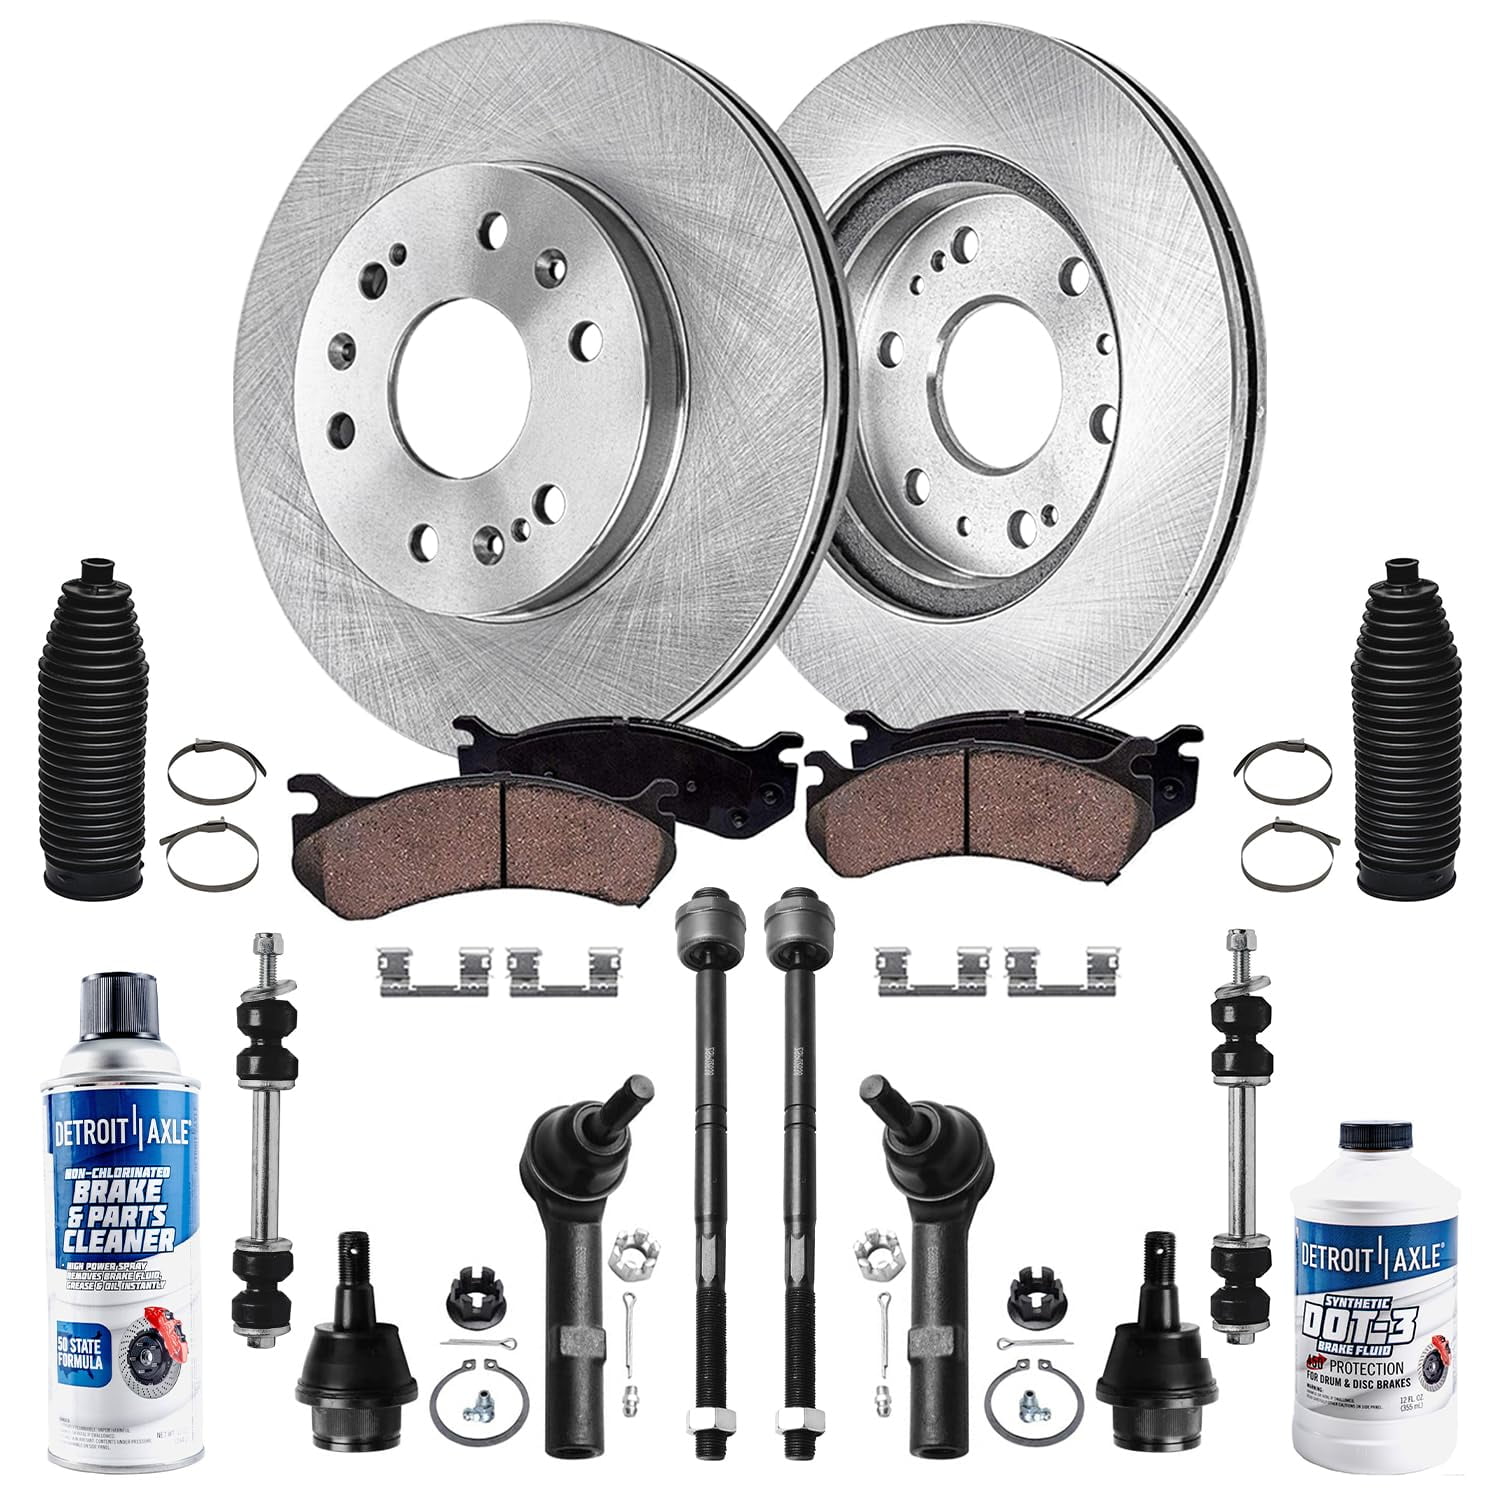 Detroit Axle   Front Disc Rotors Brake Pads Tie Rods Suspension Kit  Replacement for Chevy Tahoe GMC Sierra  Fits select:  ,  CHEVROLET